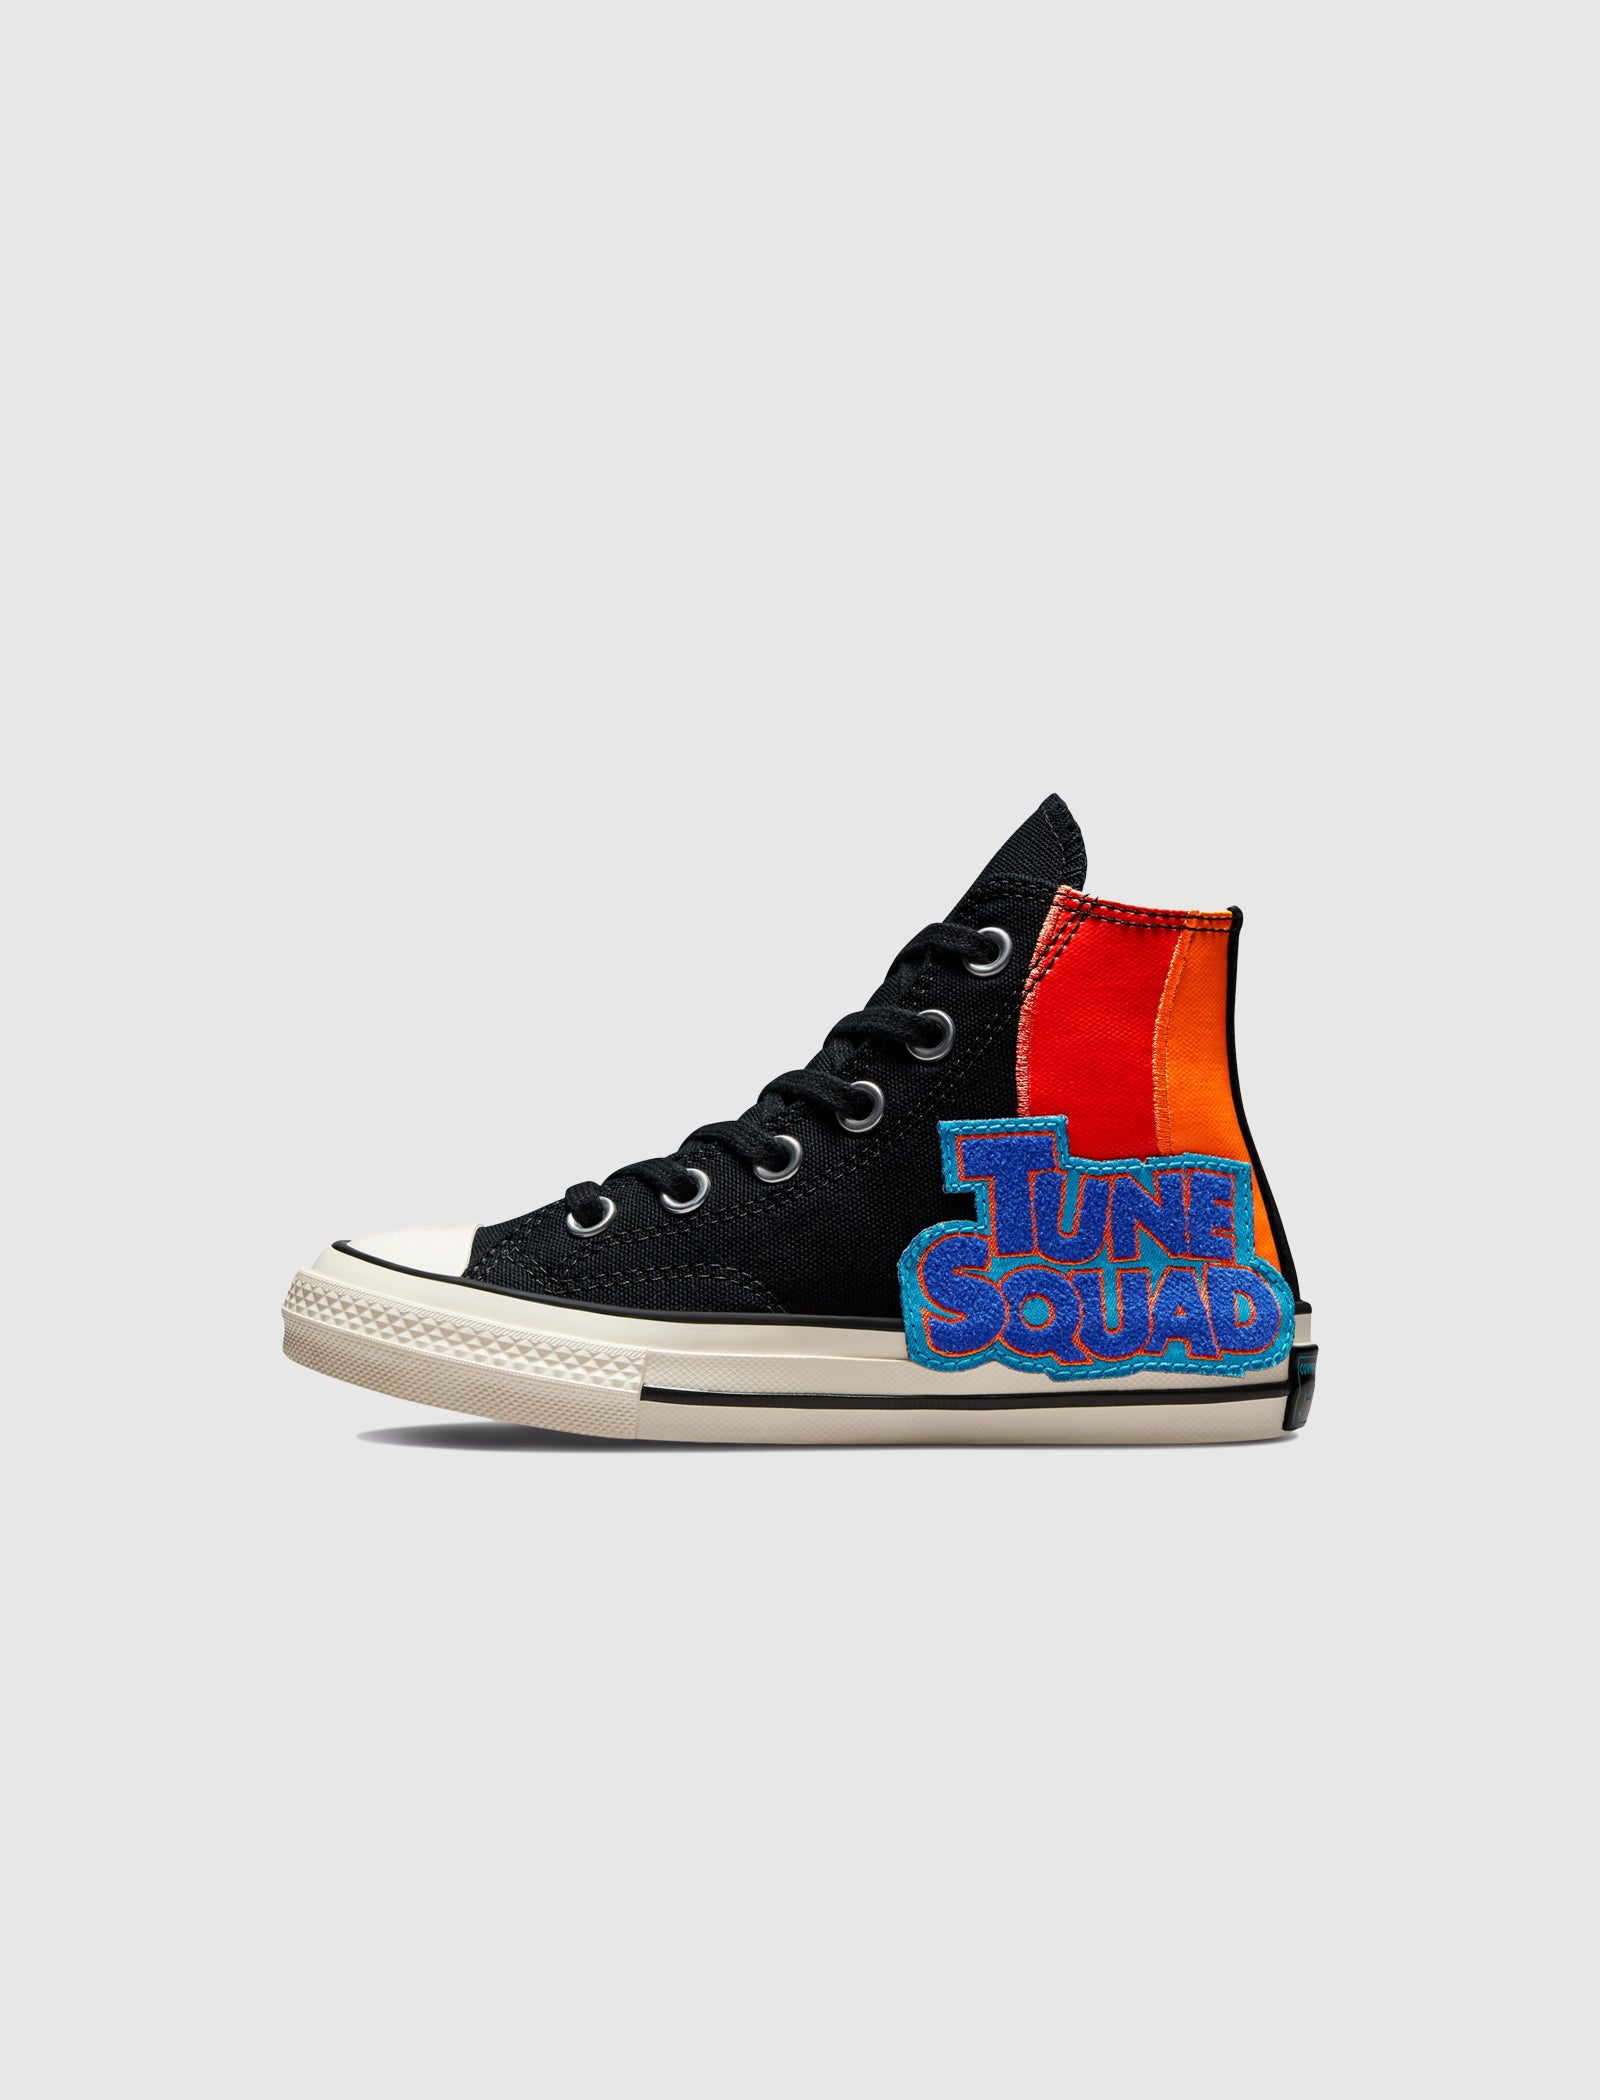 SPACE JAM CHUCK TAYLOR 70 "TUNE SQUAD" PS